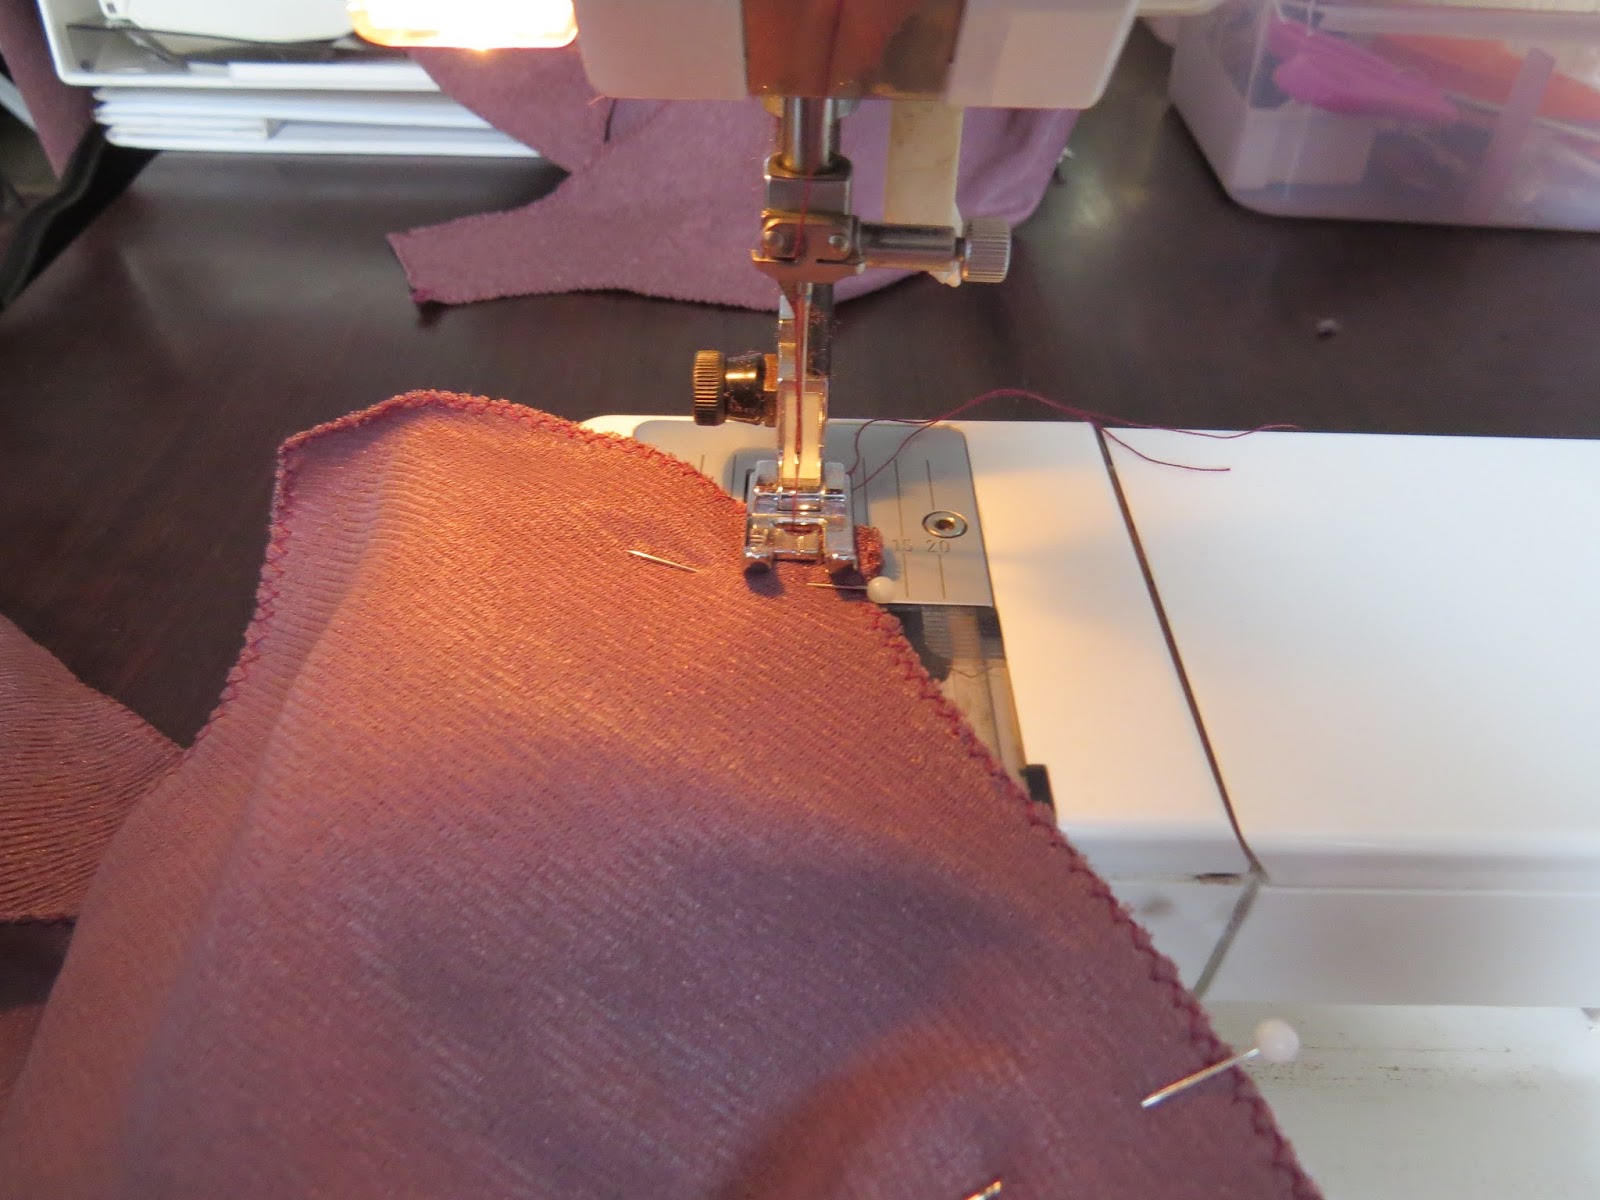 A Pretty Talent Blog: Sewing A Basic Top With An Under-stitched Facing.